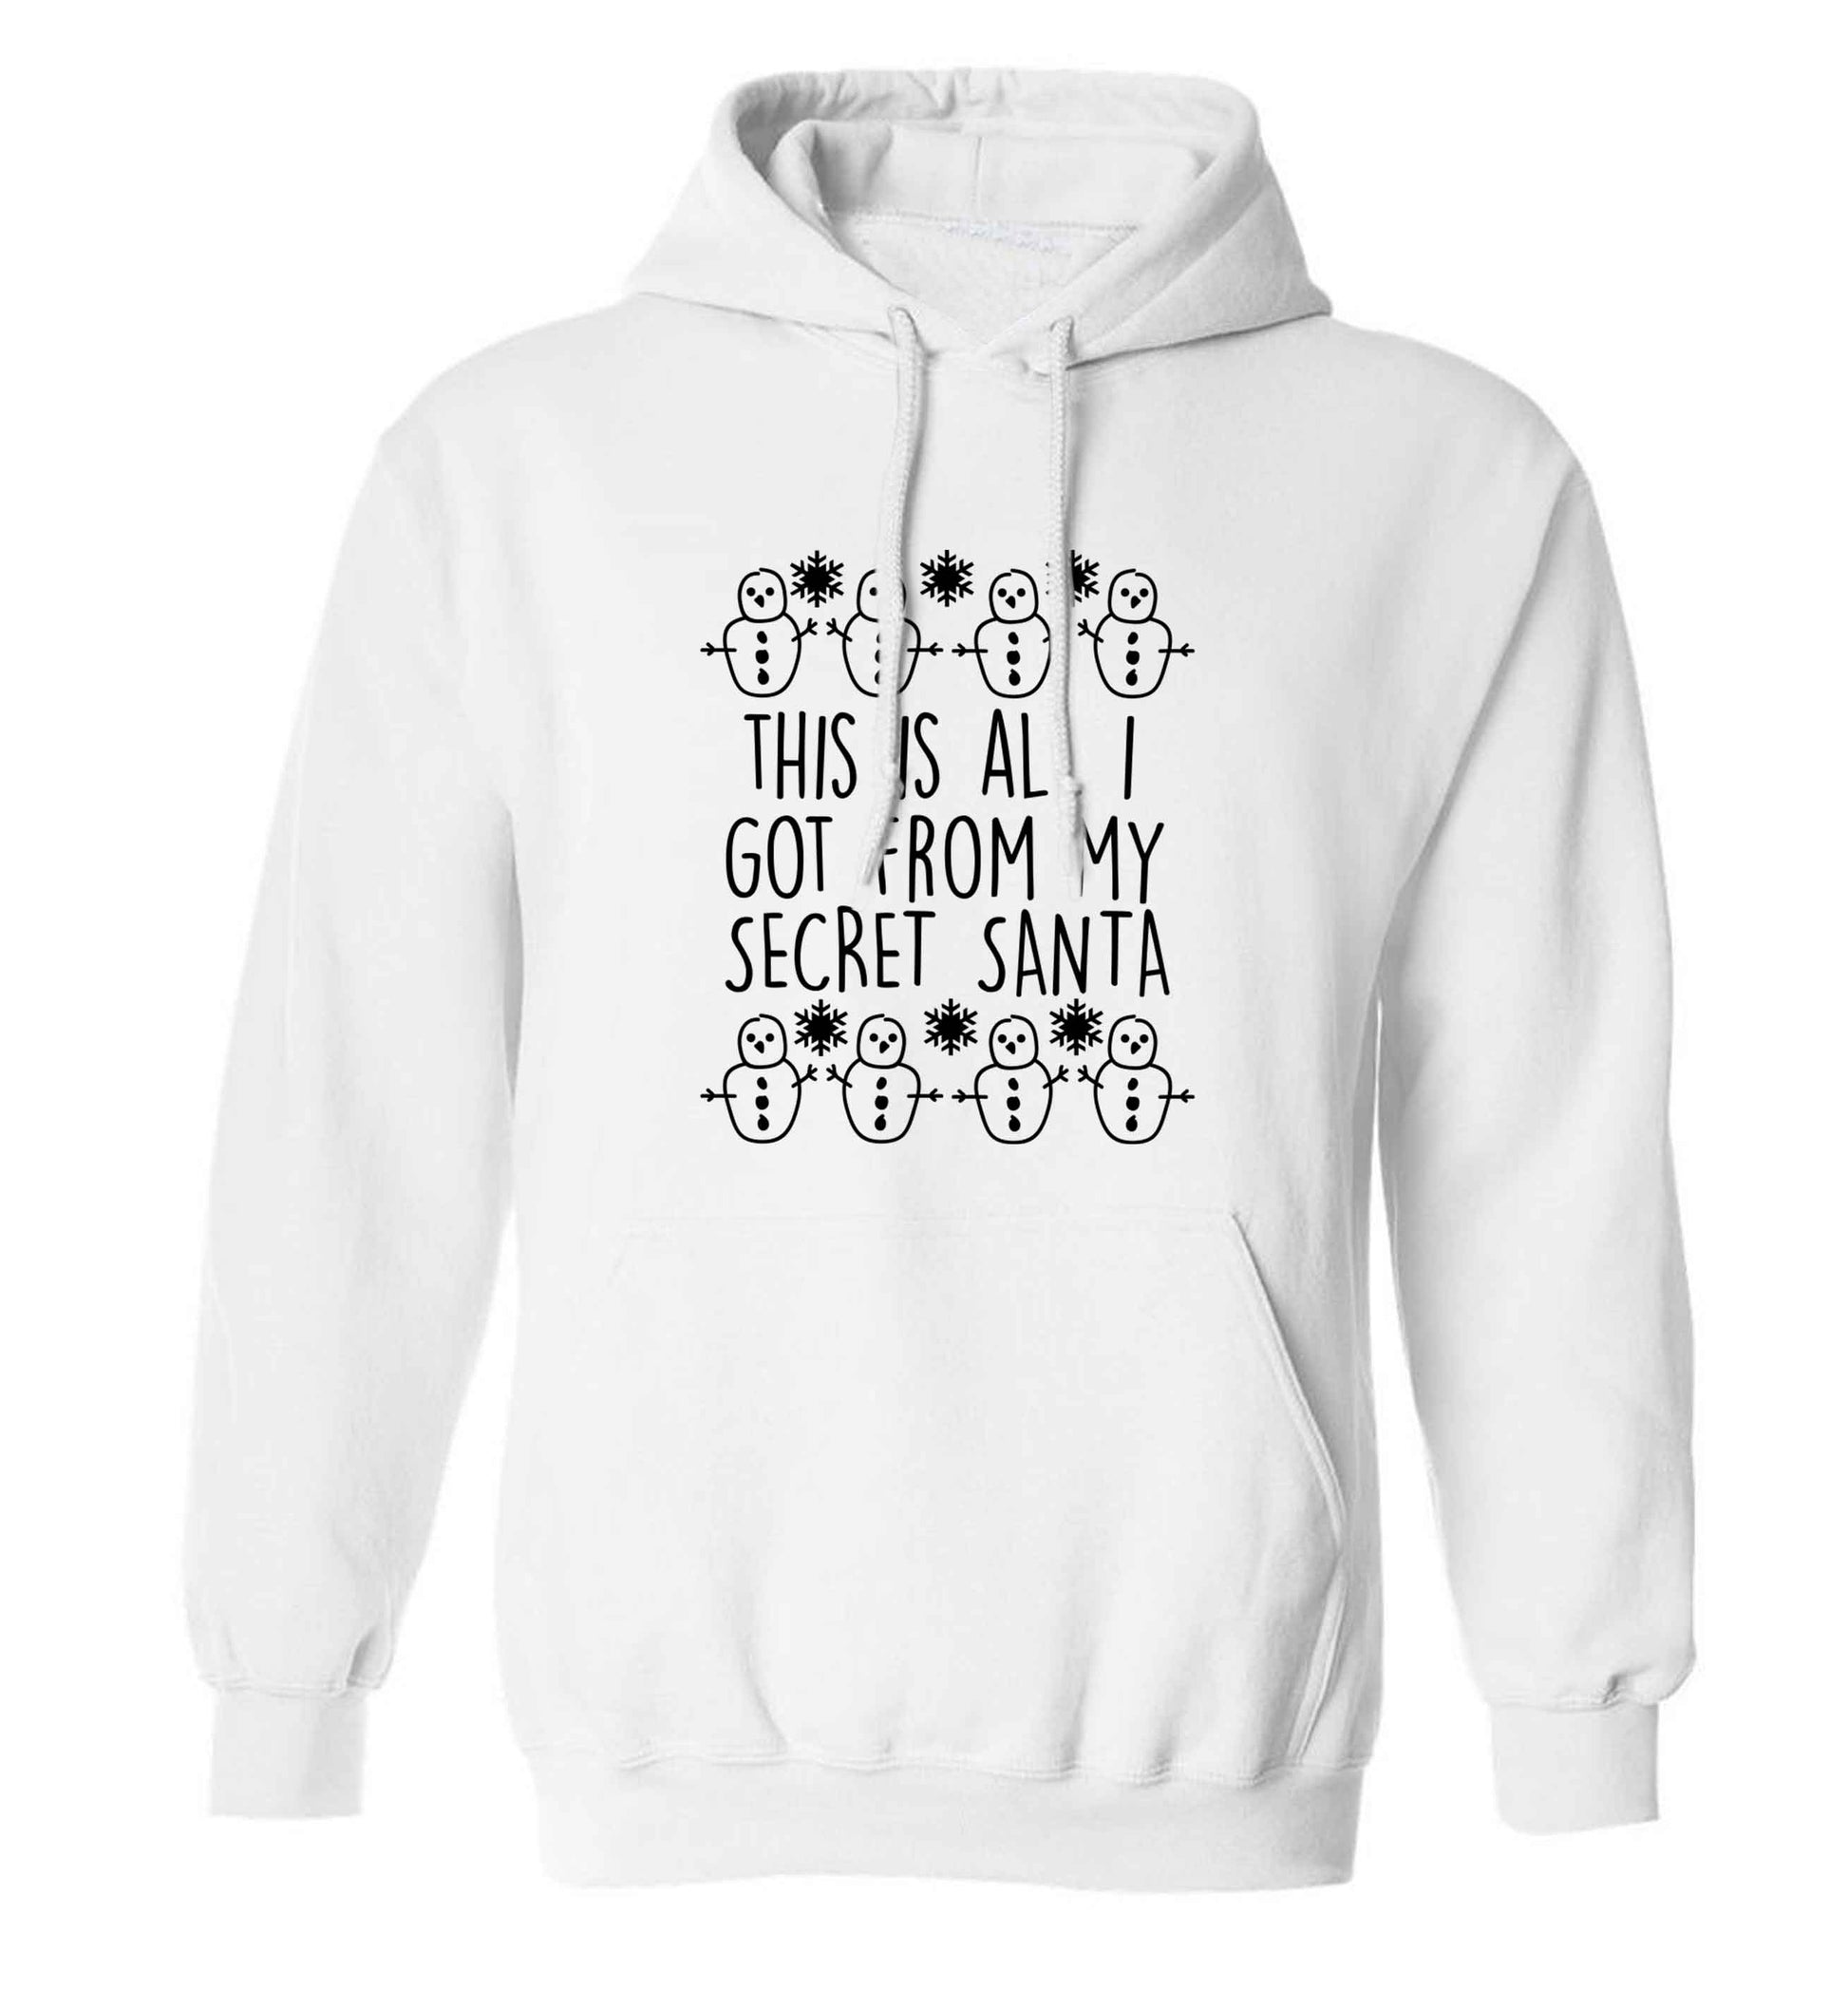 This is all I got from my secret Santa adults unisex white hoodie 2XL